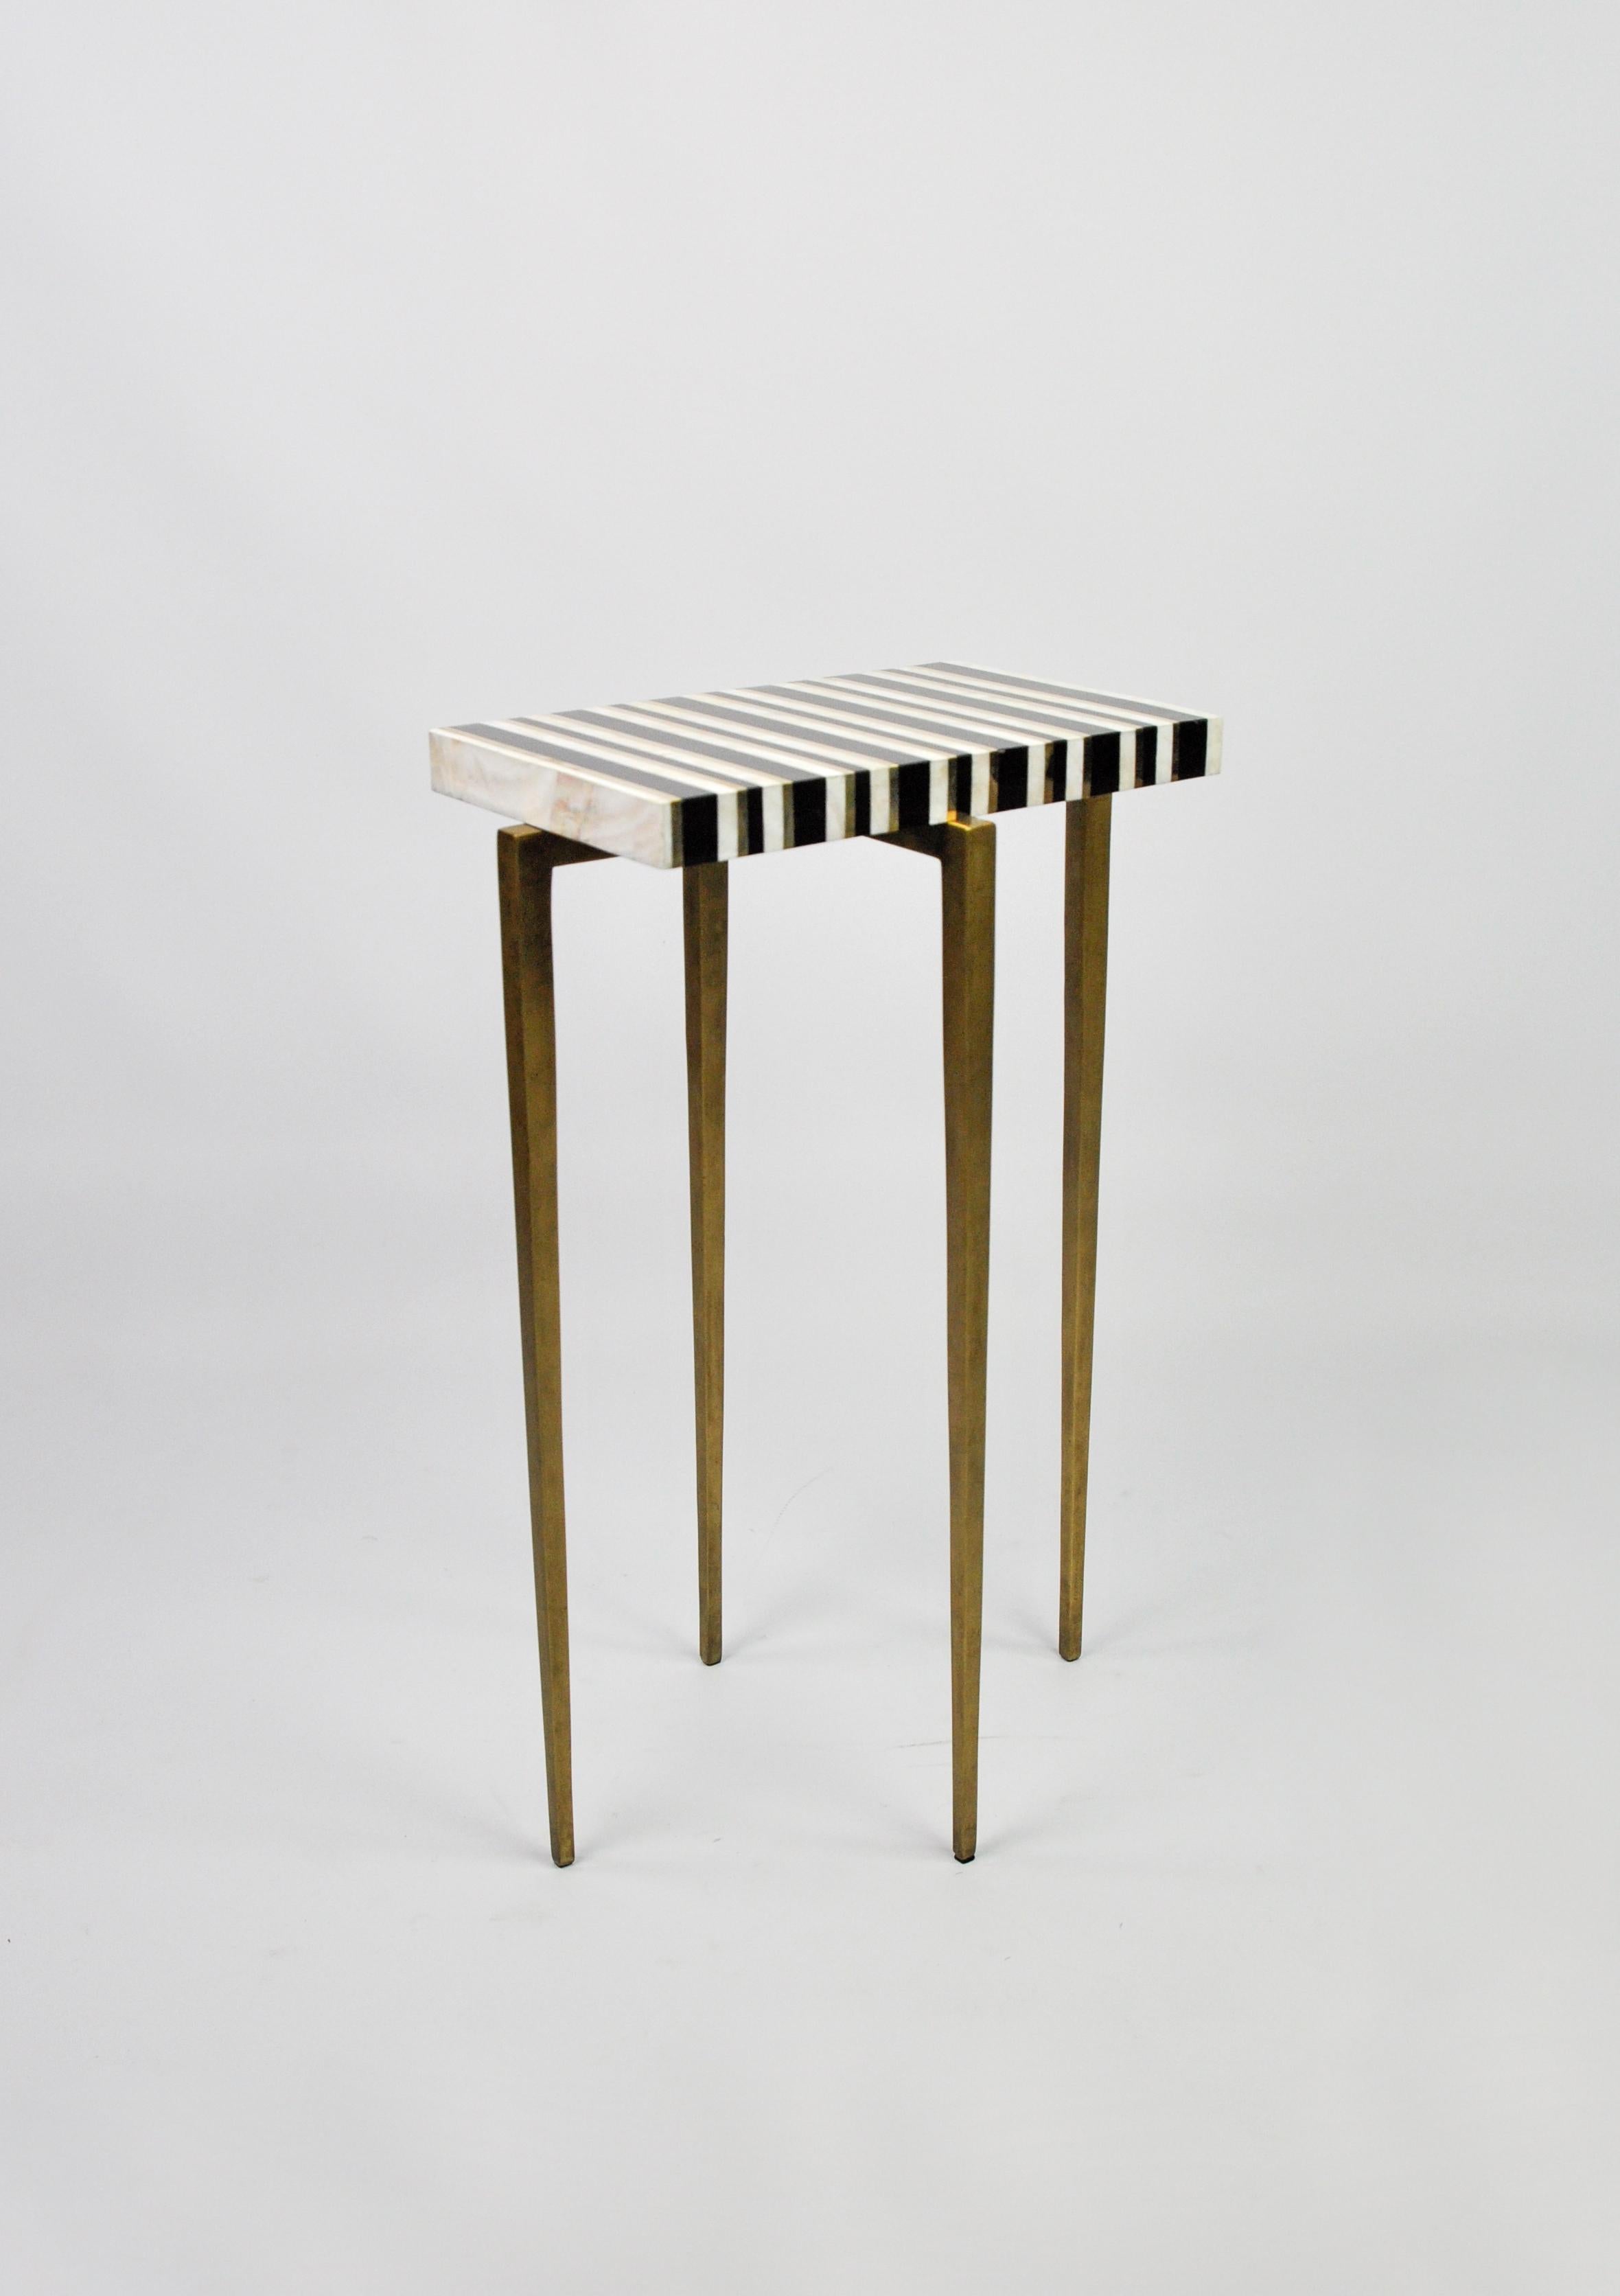 This tiny table is made of polished black and white marquetry with brass trims.

The top is rectangular and the metal feet have an antique brass patina.

The table is small and very versatile. It can be placed anywhere near a sofa and an